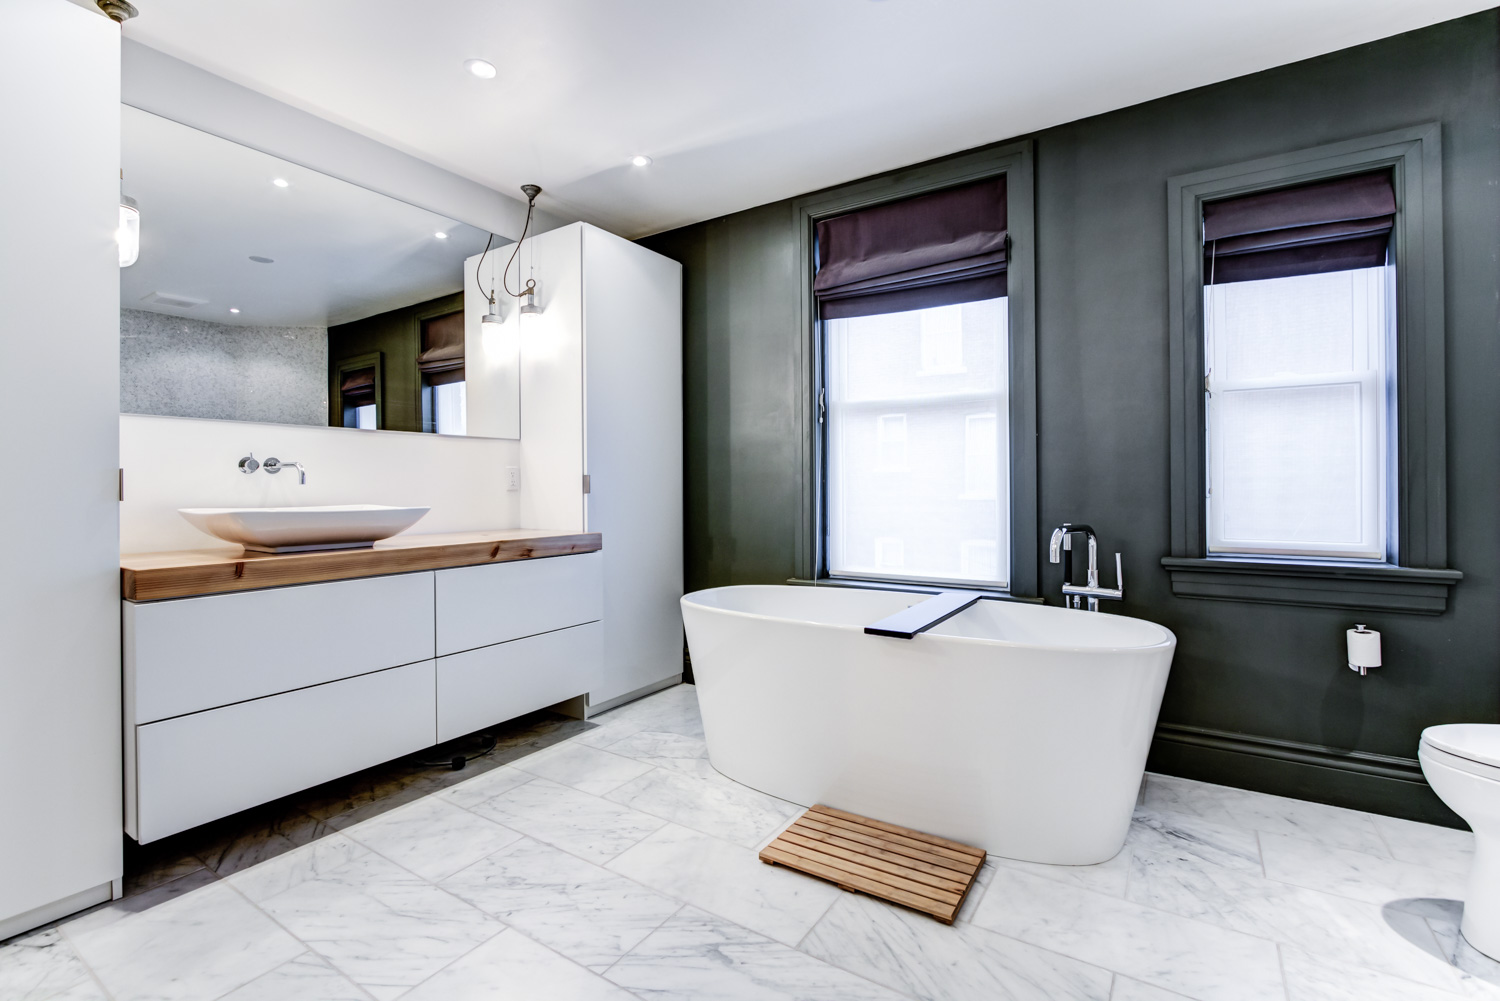 Master bathroom with white heated marble flooring and soaker tub